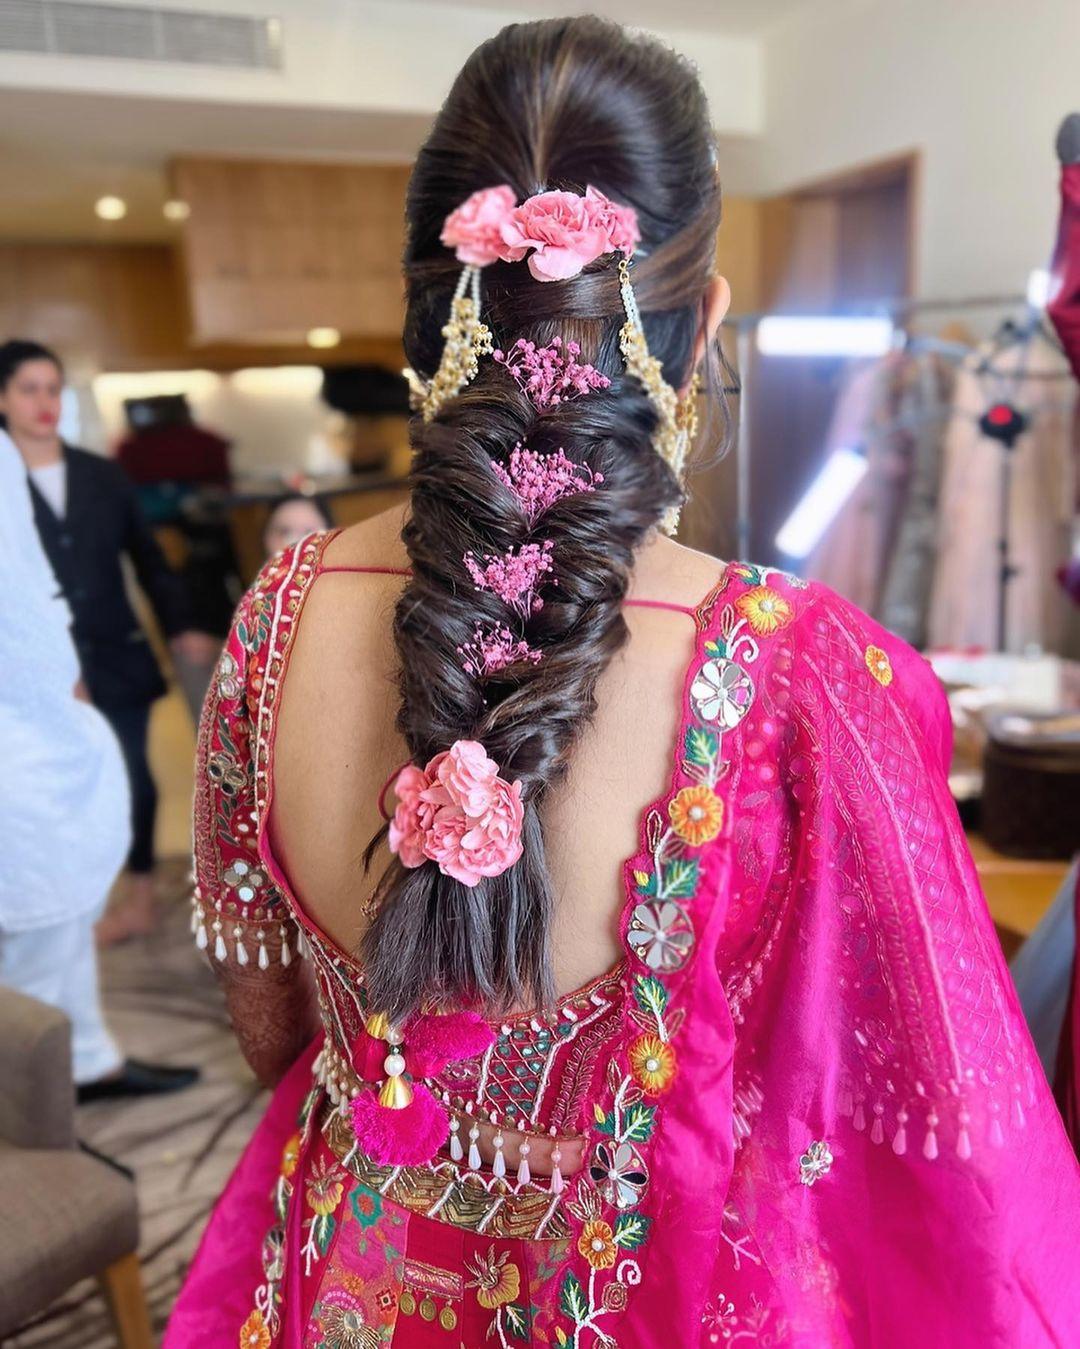 South Indian braided hairstyles for your tresses. ✨😍 . | Bridal hair  decorations, Braided hairstyles for wedding, Bridal hairstyles with braids